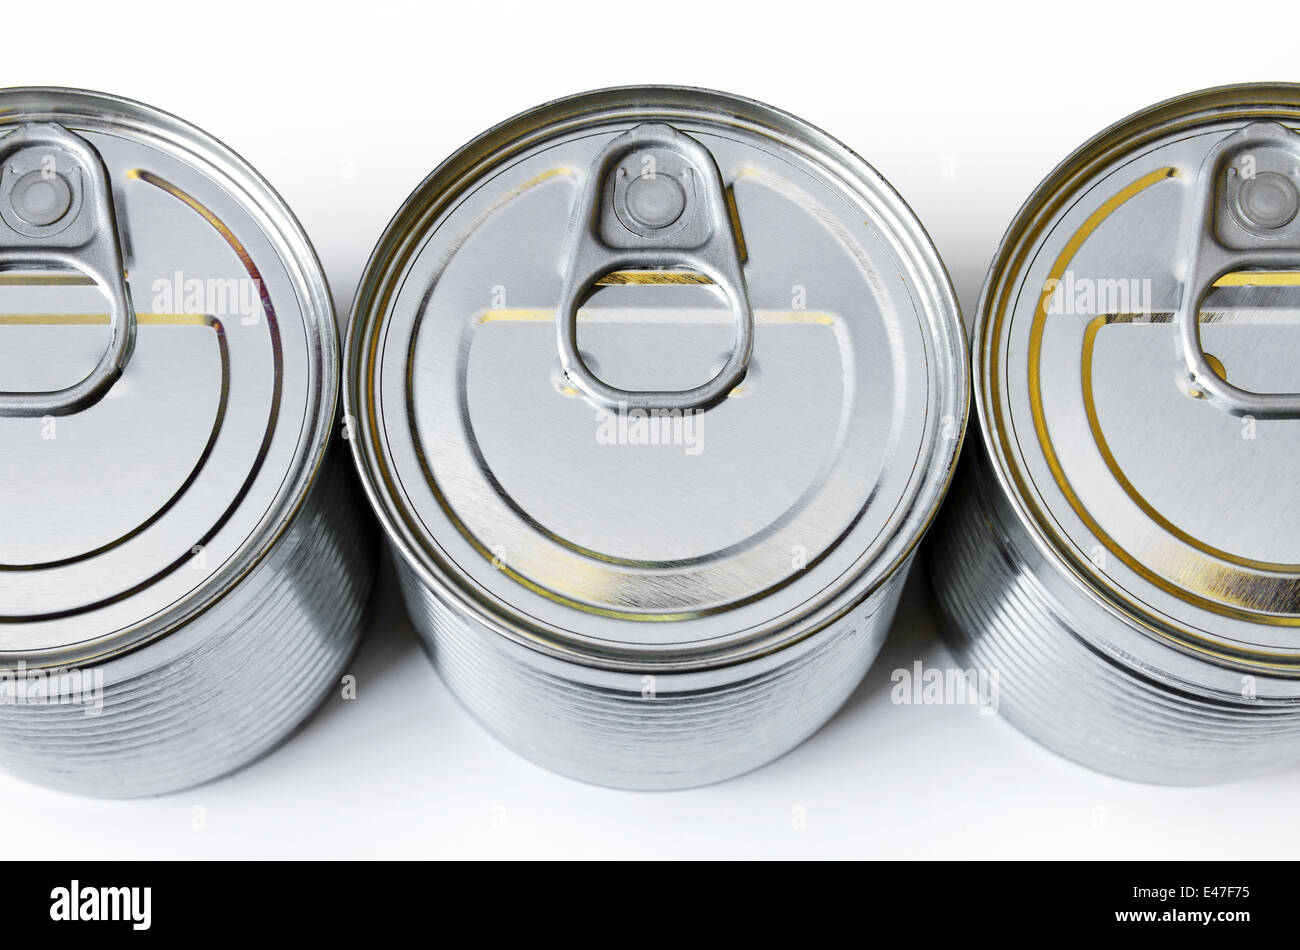 detail of the lids of three cans of conserved food Stock Photo